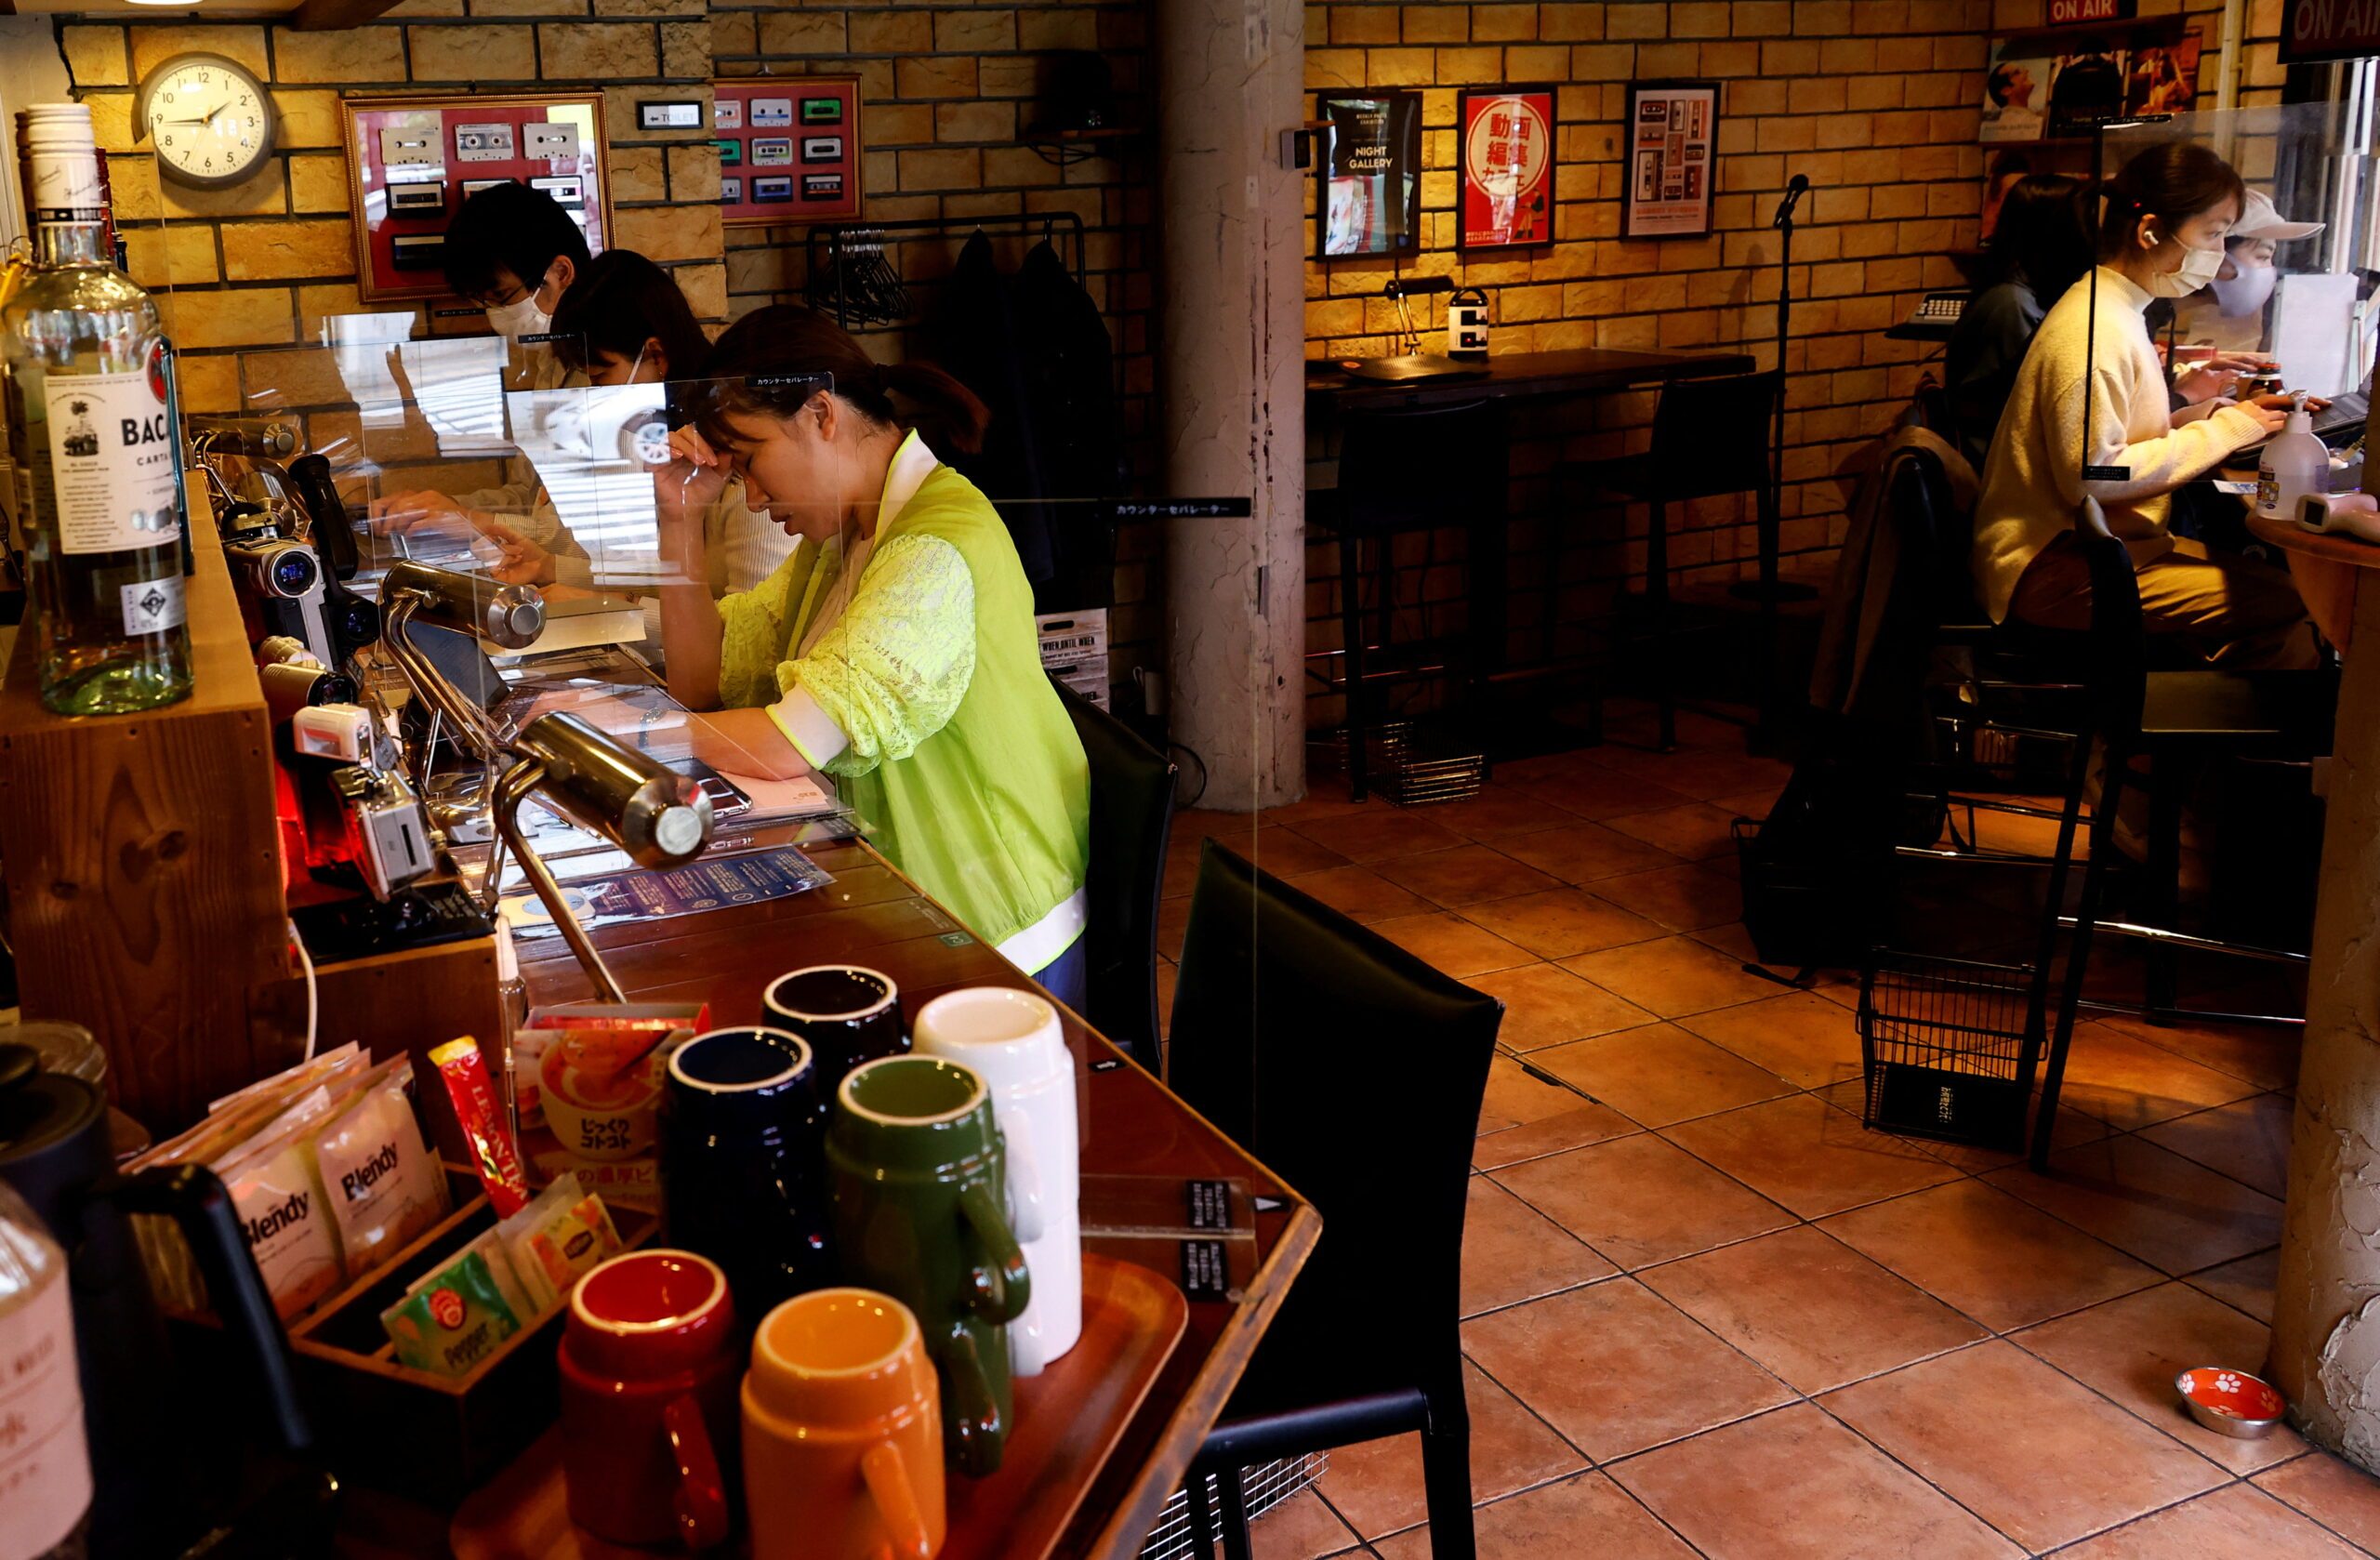 Coffee, tea, and nagging at Japan’s anti-procrastination cafe